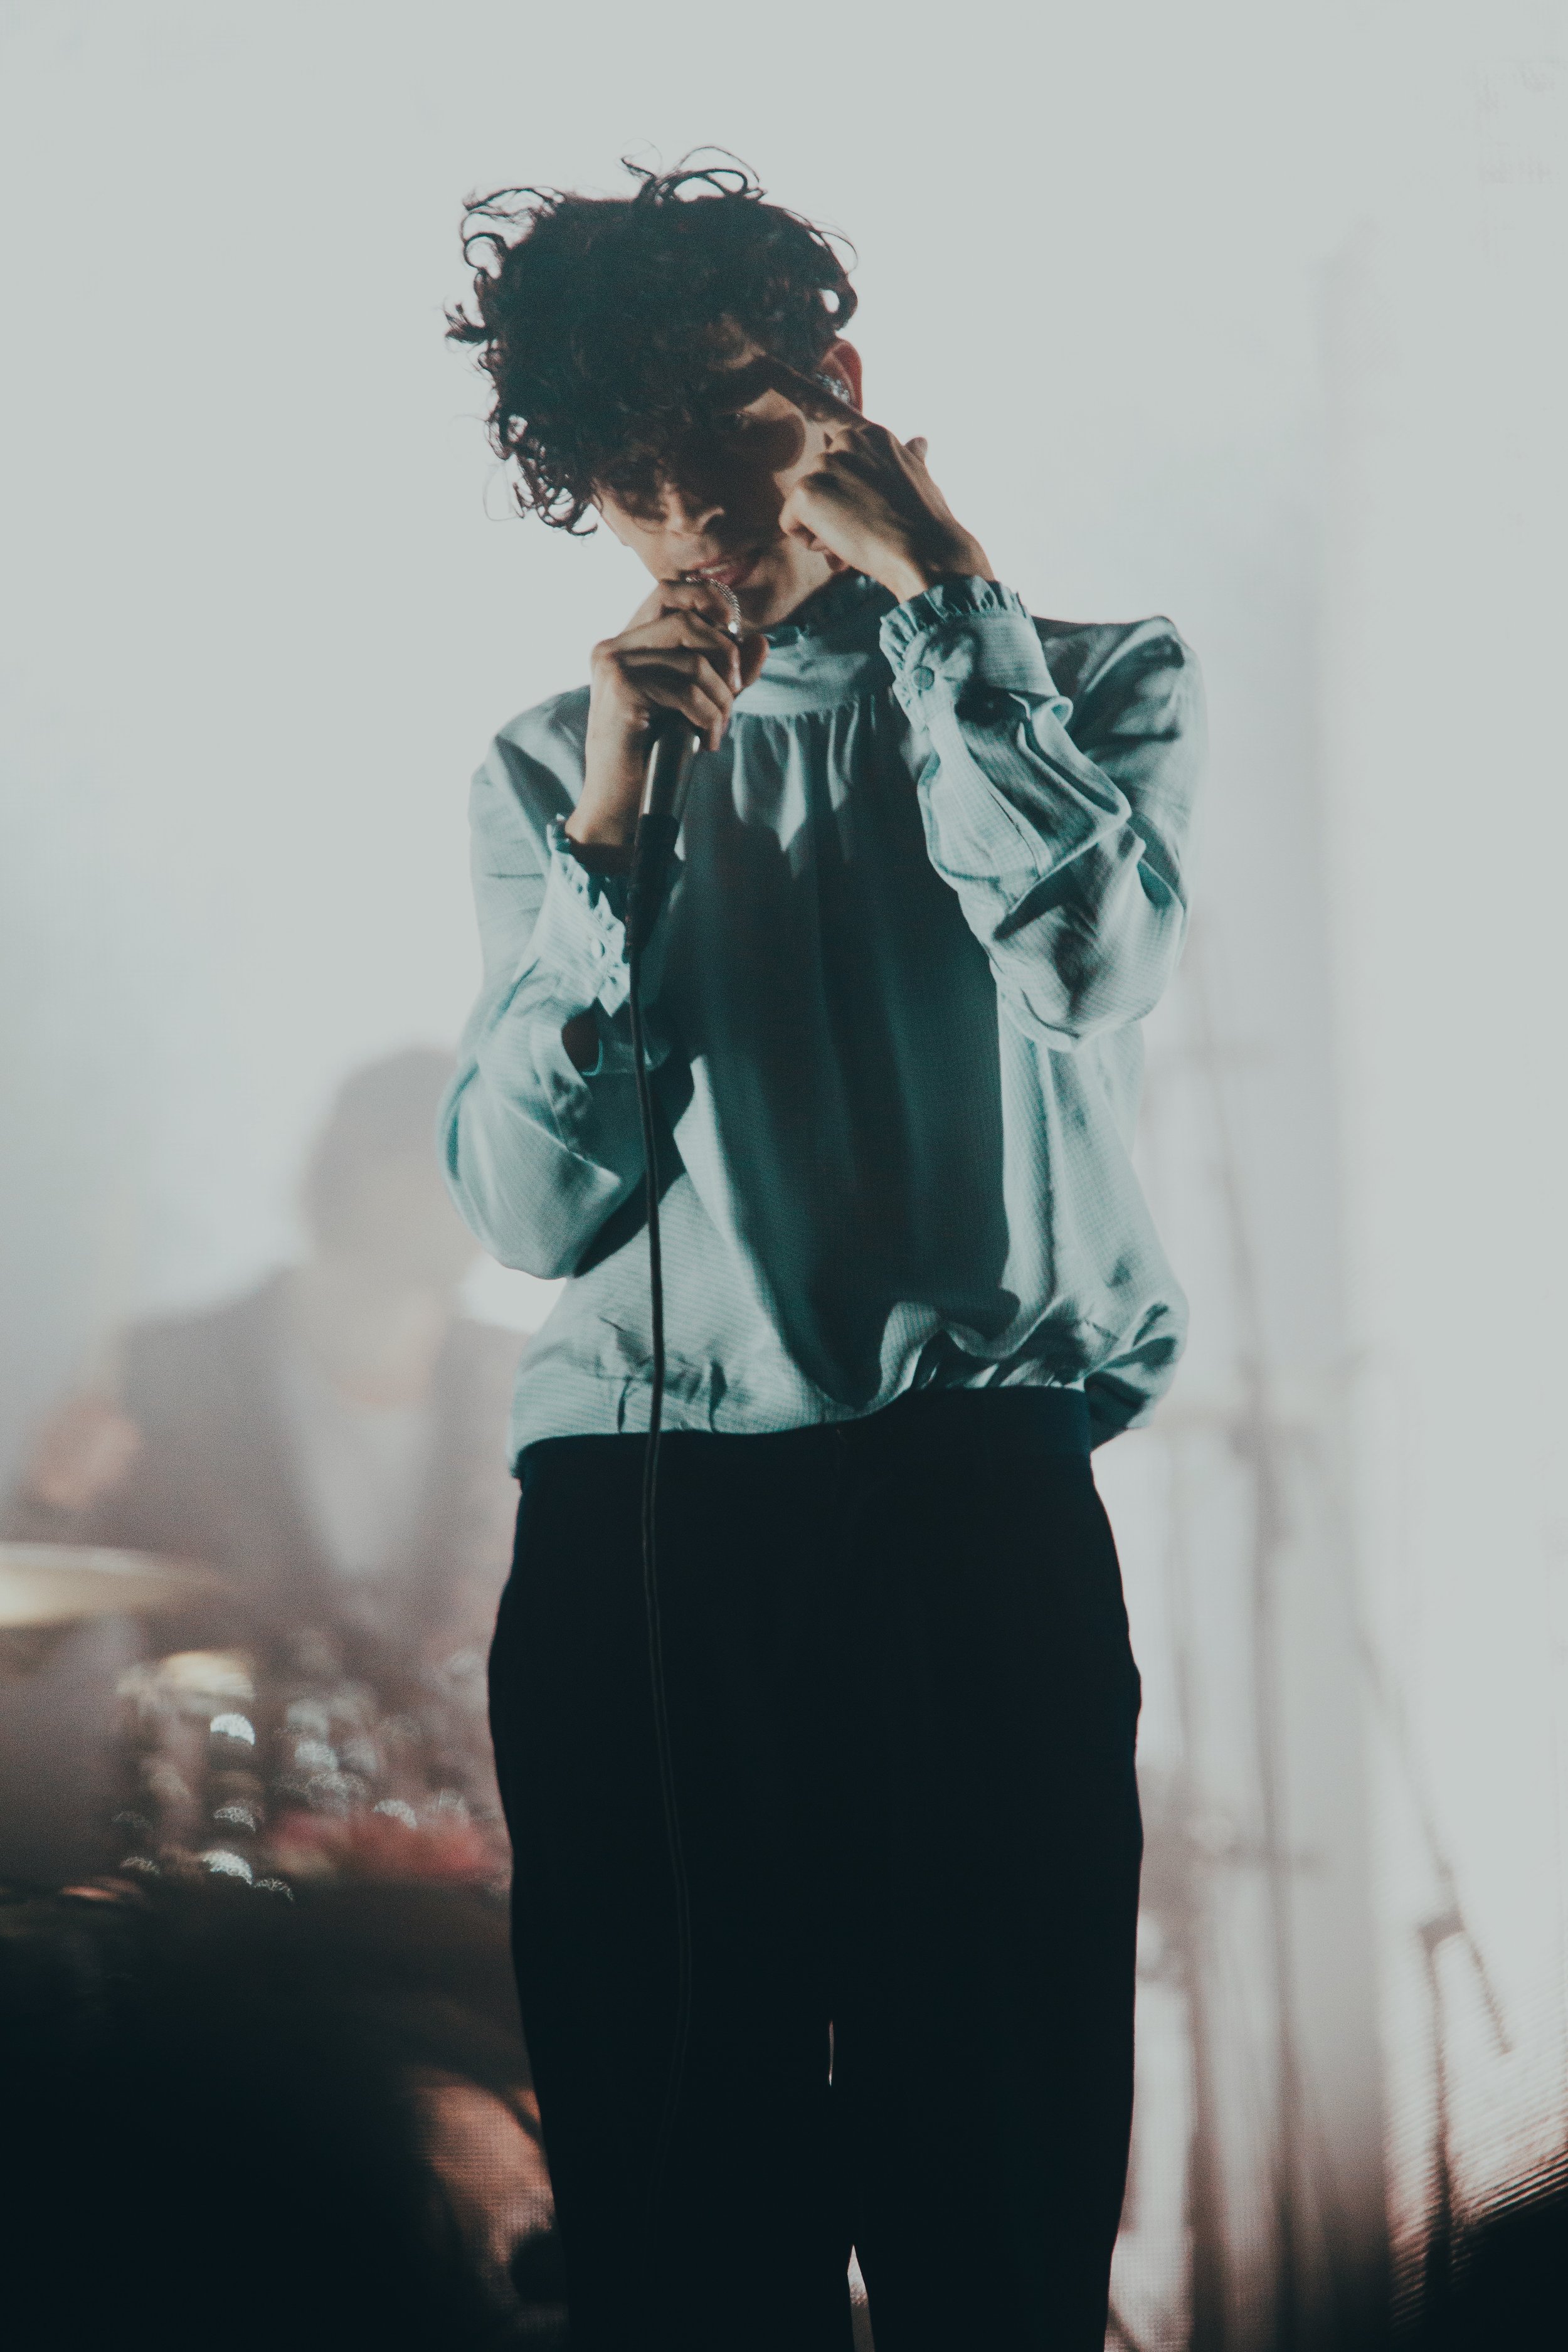 Matty, a white, male musician in his 20s, is wearing a ruffled teal blouse with sleek black trousers. His curly black hair casts his face in shadows and conceals his eyes. One hand clenches a microphone while he uses the index finger of the other to point to his forehead. This position correlates to a lyric in the song he was singing. Behind him, but obscured from view by the blurring of the background, is the band’s drummer.